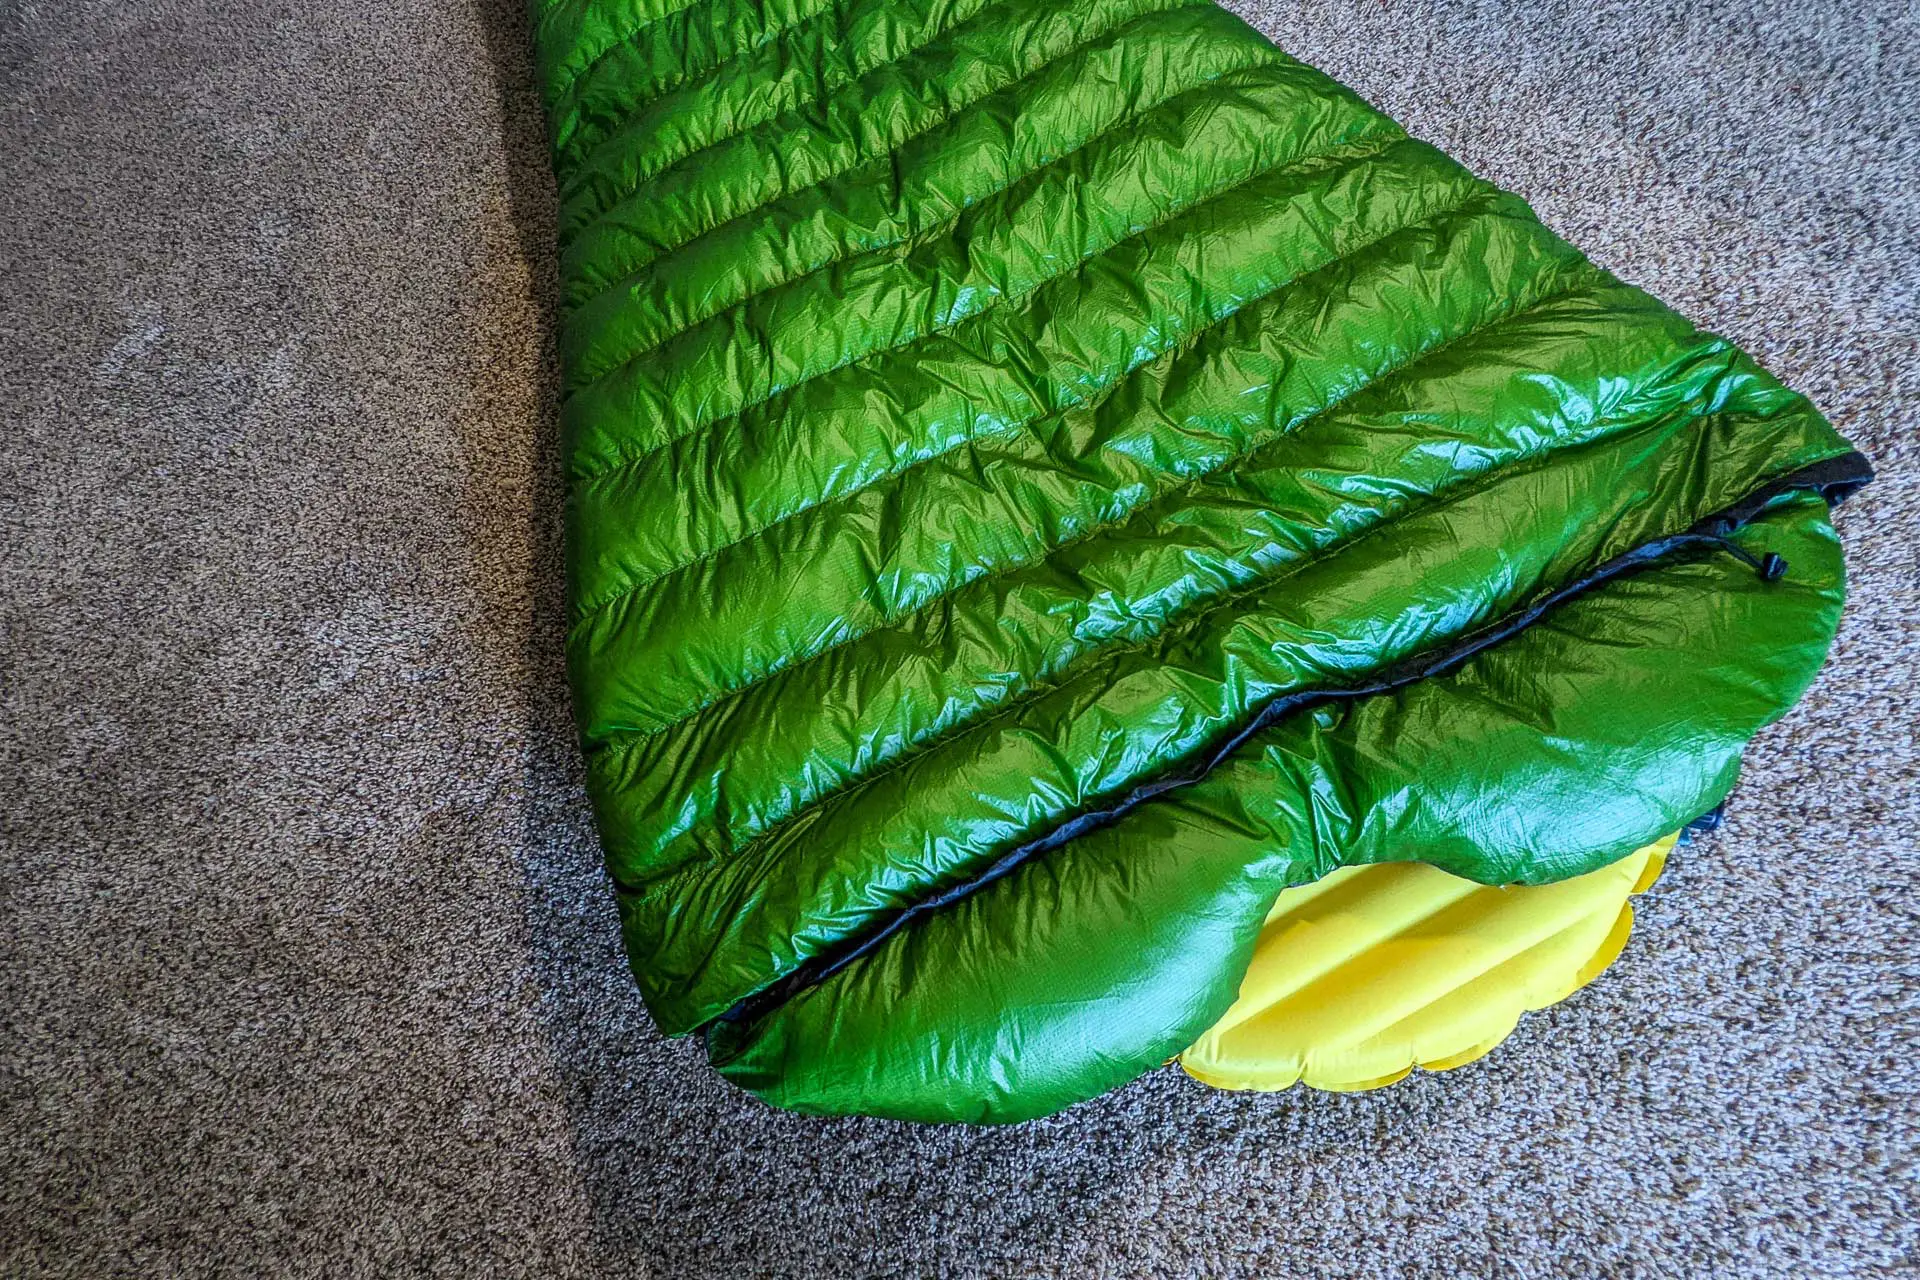 Western Mountaineering AstraLite Quilt Review